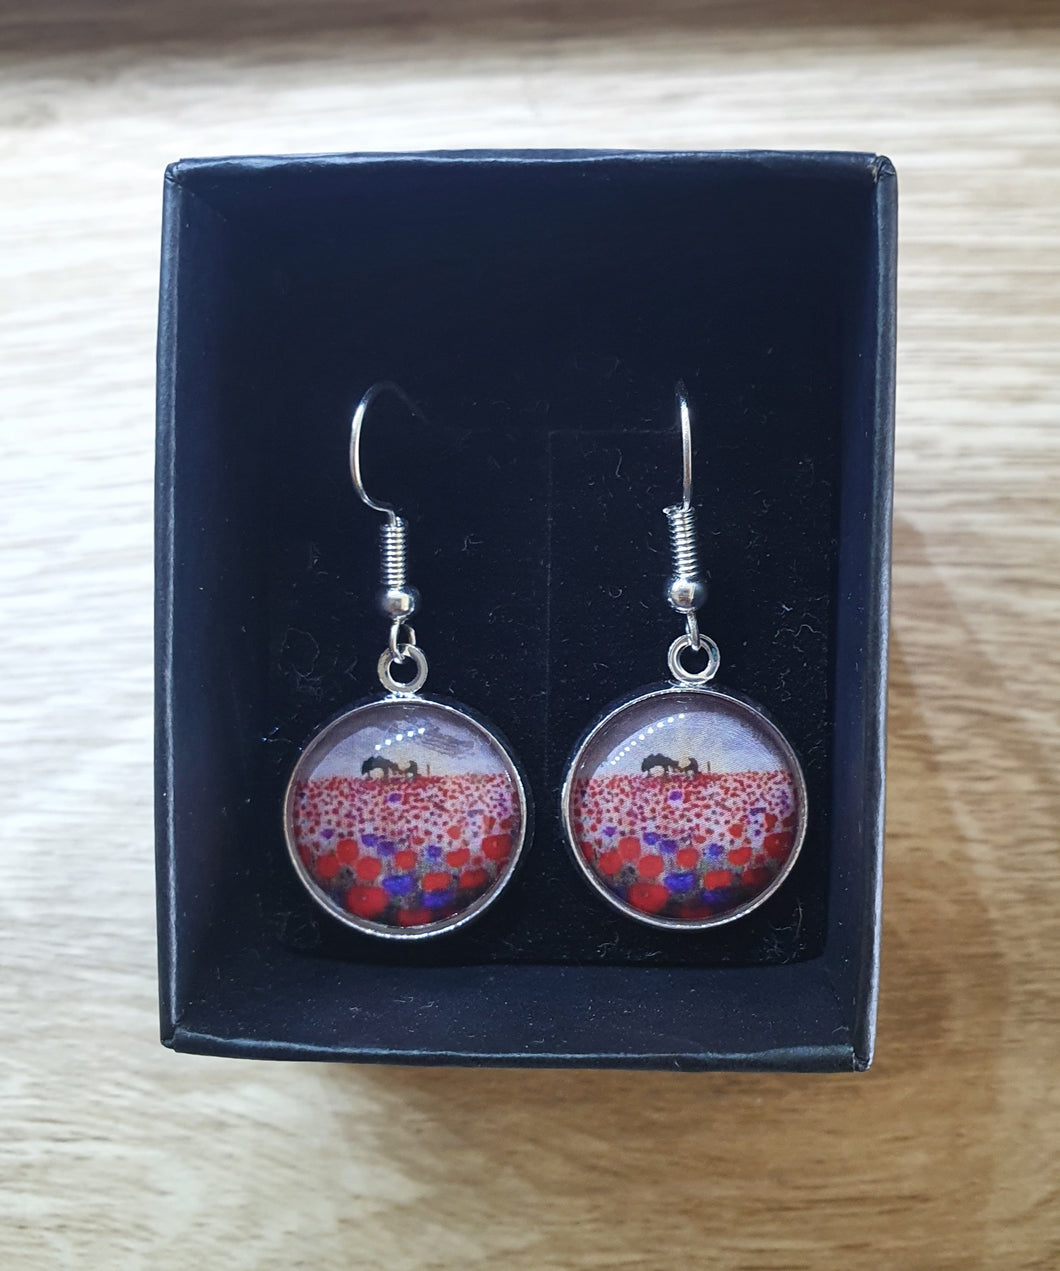 original artwork of a sunrise (in the form of the ANZAC Crest) with a silhouette of a soldier kneeling next to his horse drinking from his hat in a field of red and purple poppies on 16mm surgical steel fishhook earrings